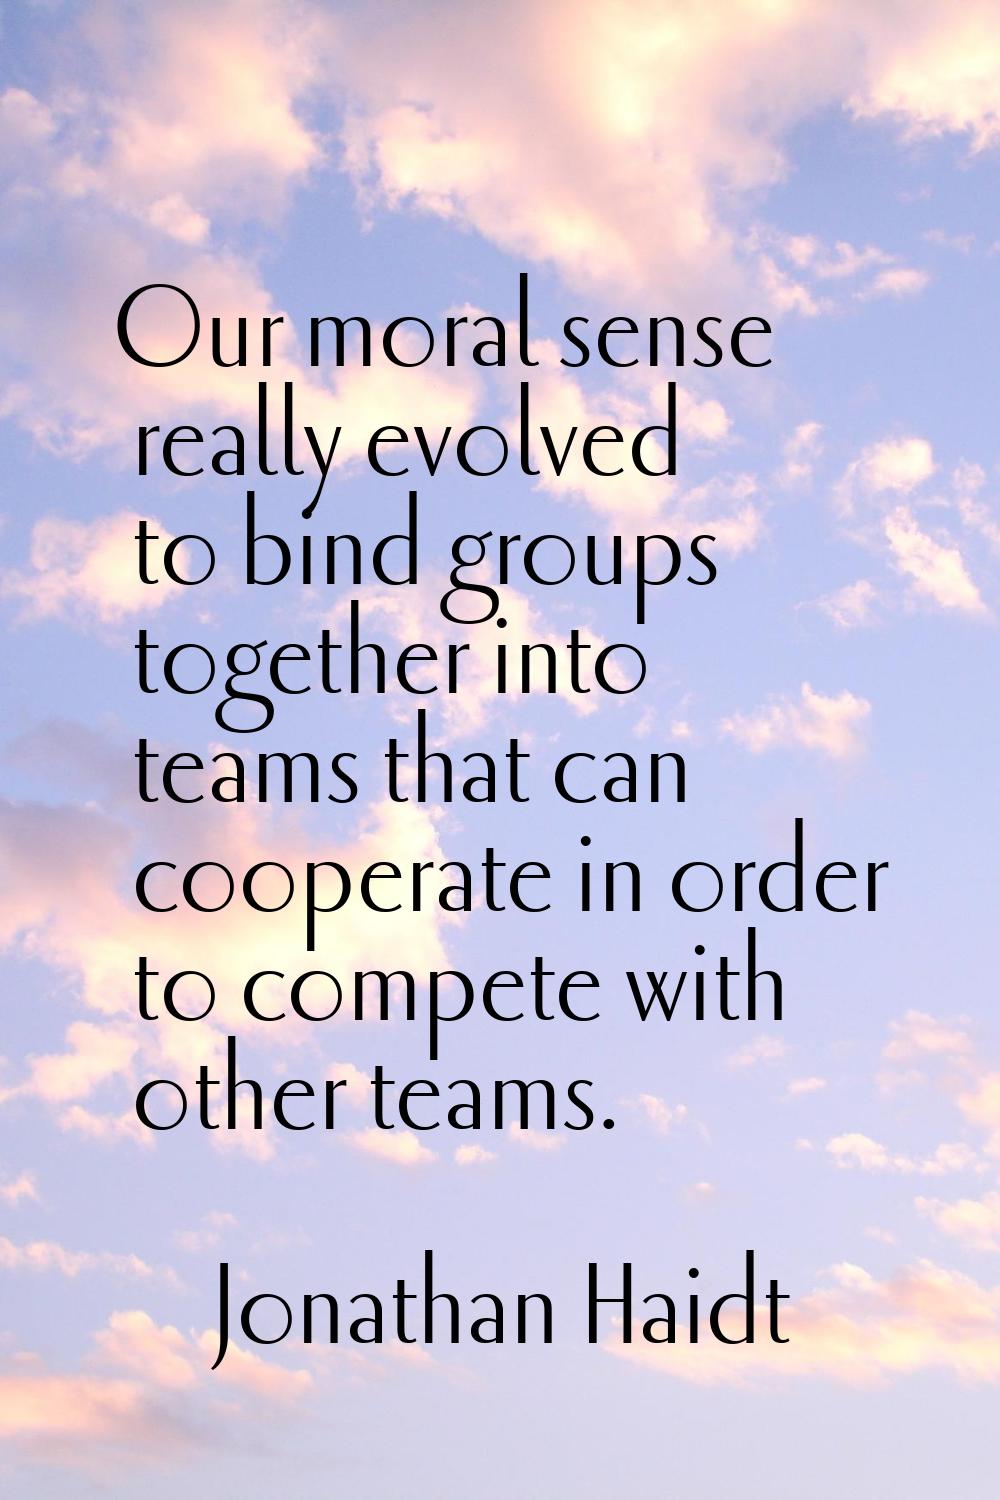 Our moral sense really evolved to bind groups together into teams that can cooperate in order to co